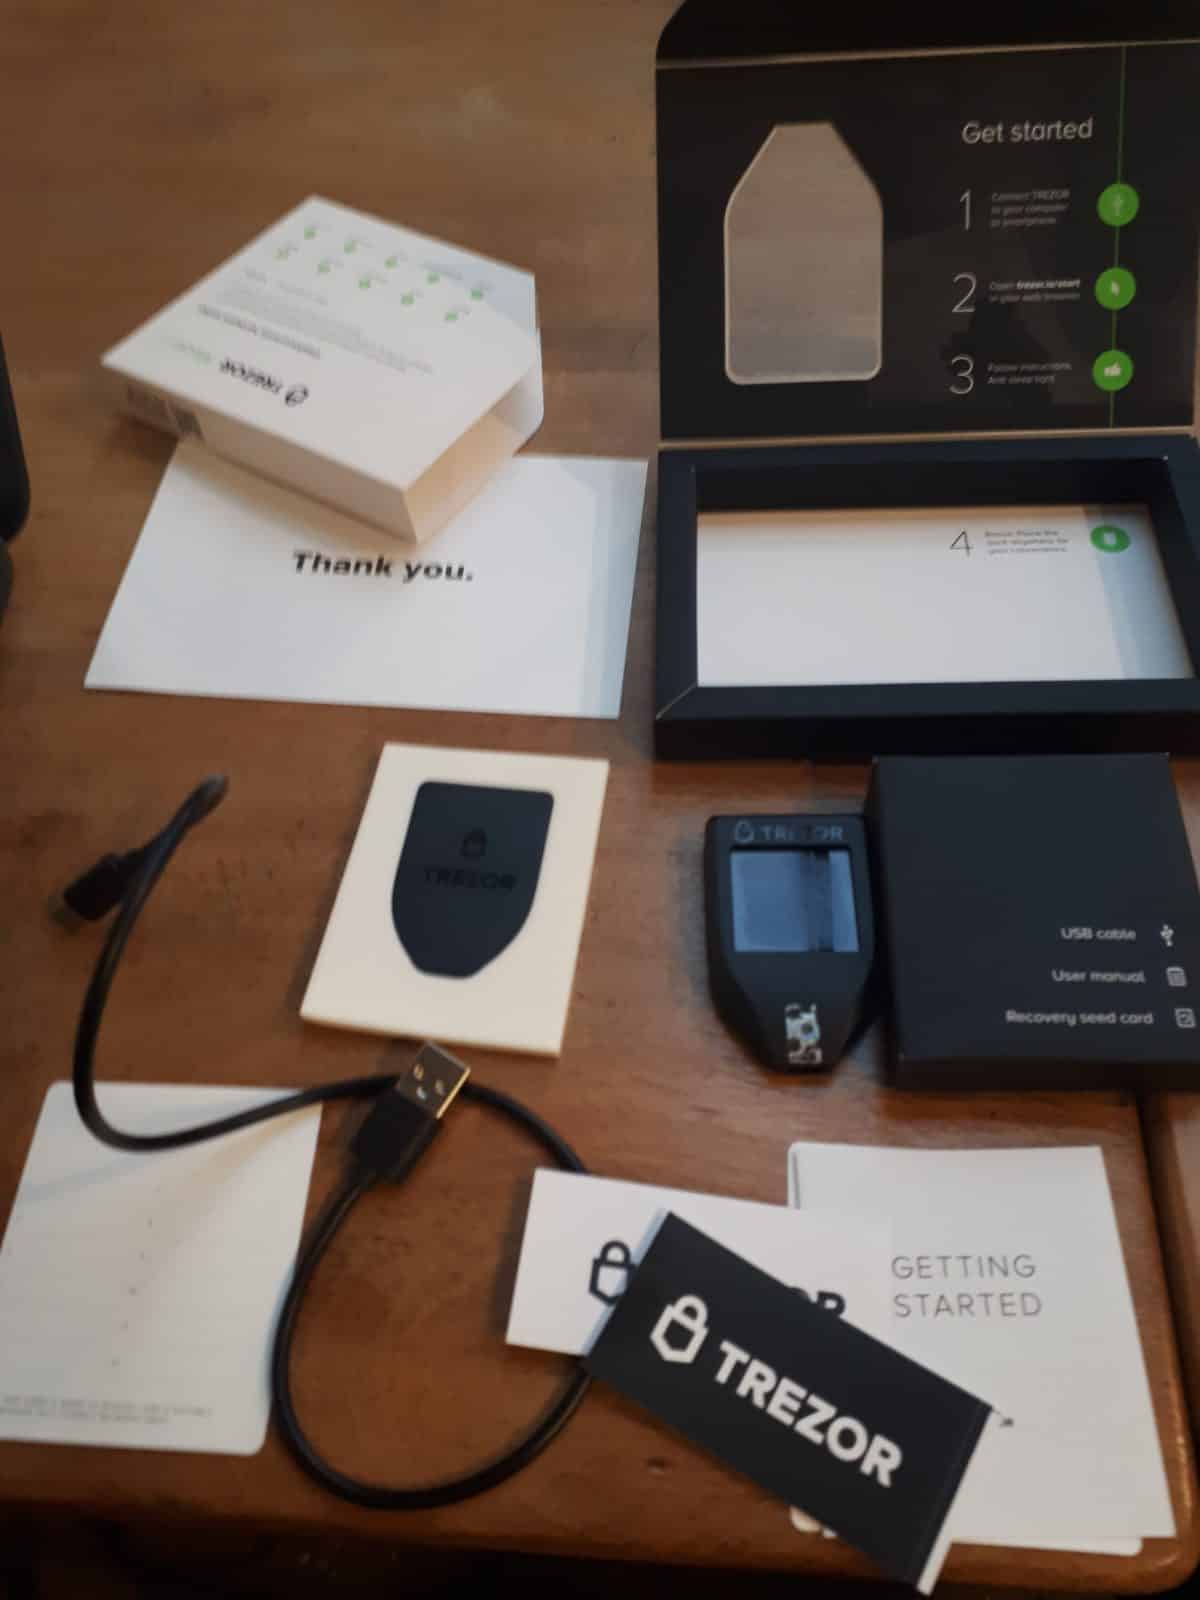 Hands On With the Latest Bitcoin Hardware Wallet: Trezor's Model T - 3